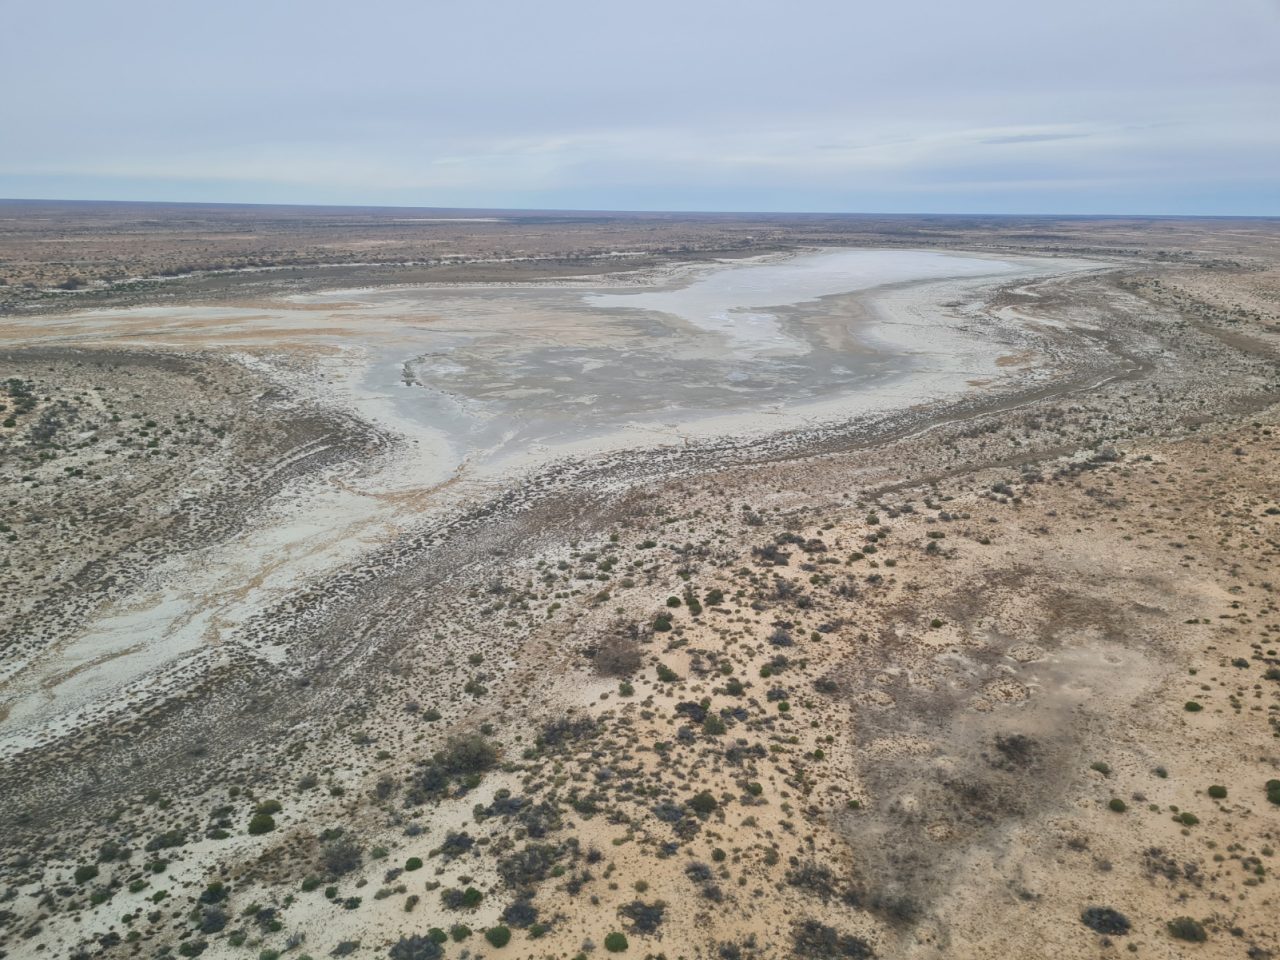 Aerial photo of a dried out desert lake in outback SA. Lake bed is white & light grey, the land around is flat, and sandy with a sparse ground cover vegetation